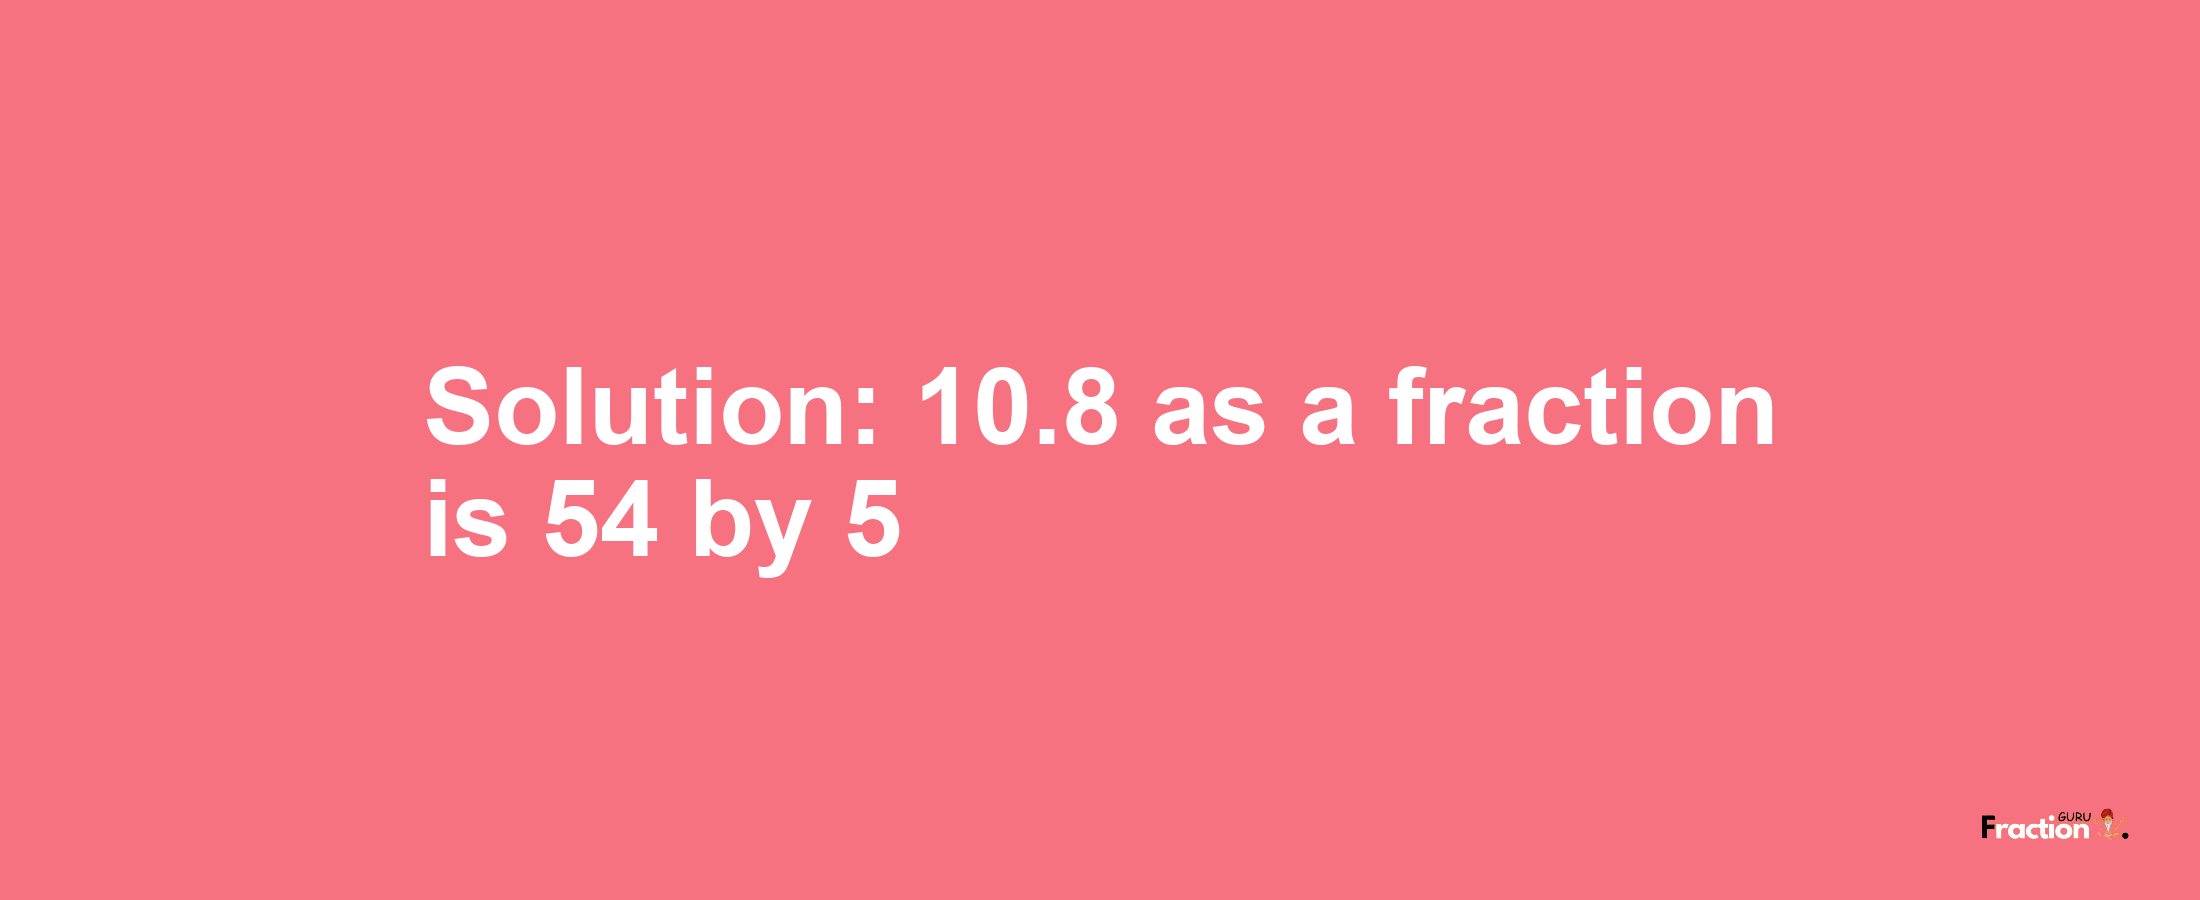 Solution:10.8 as a fraction is 54/5